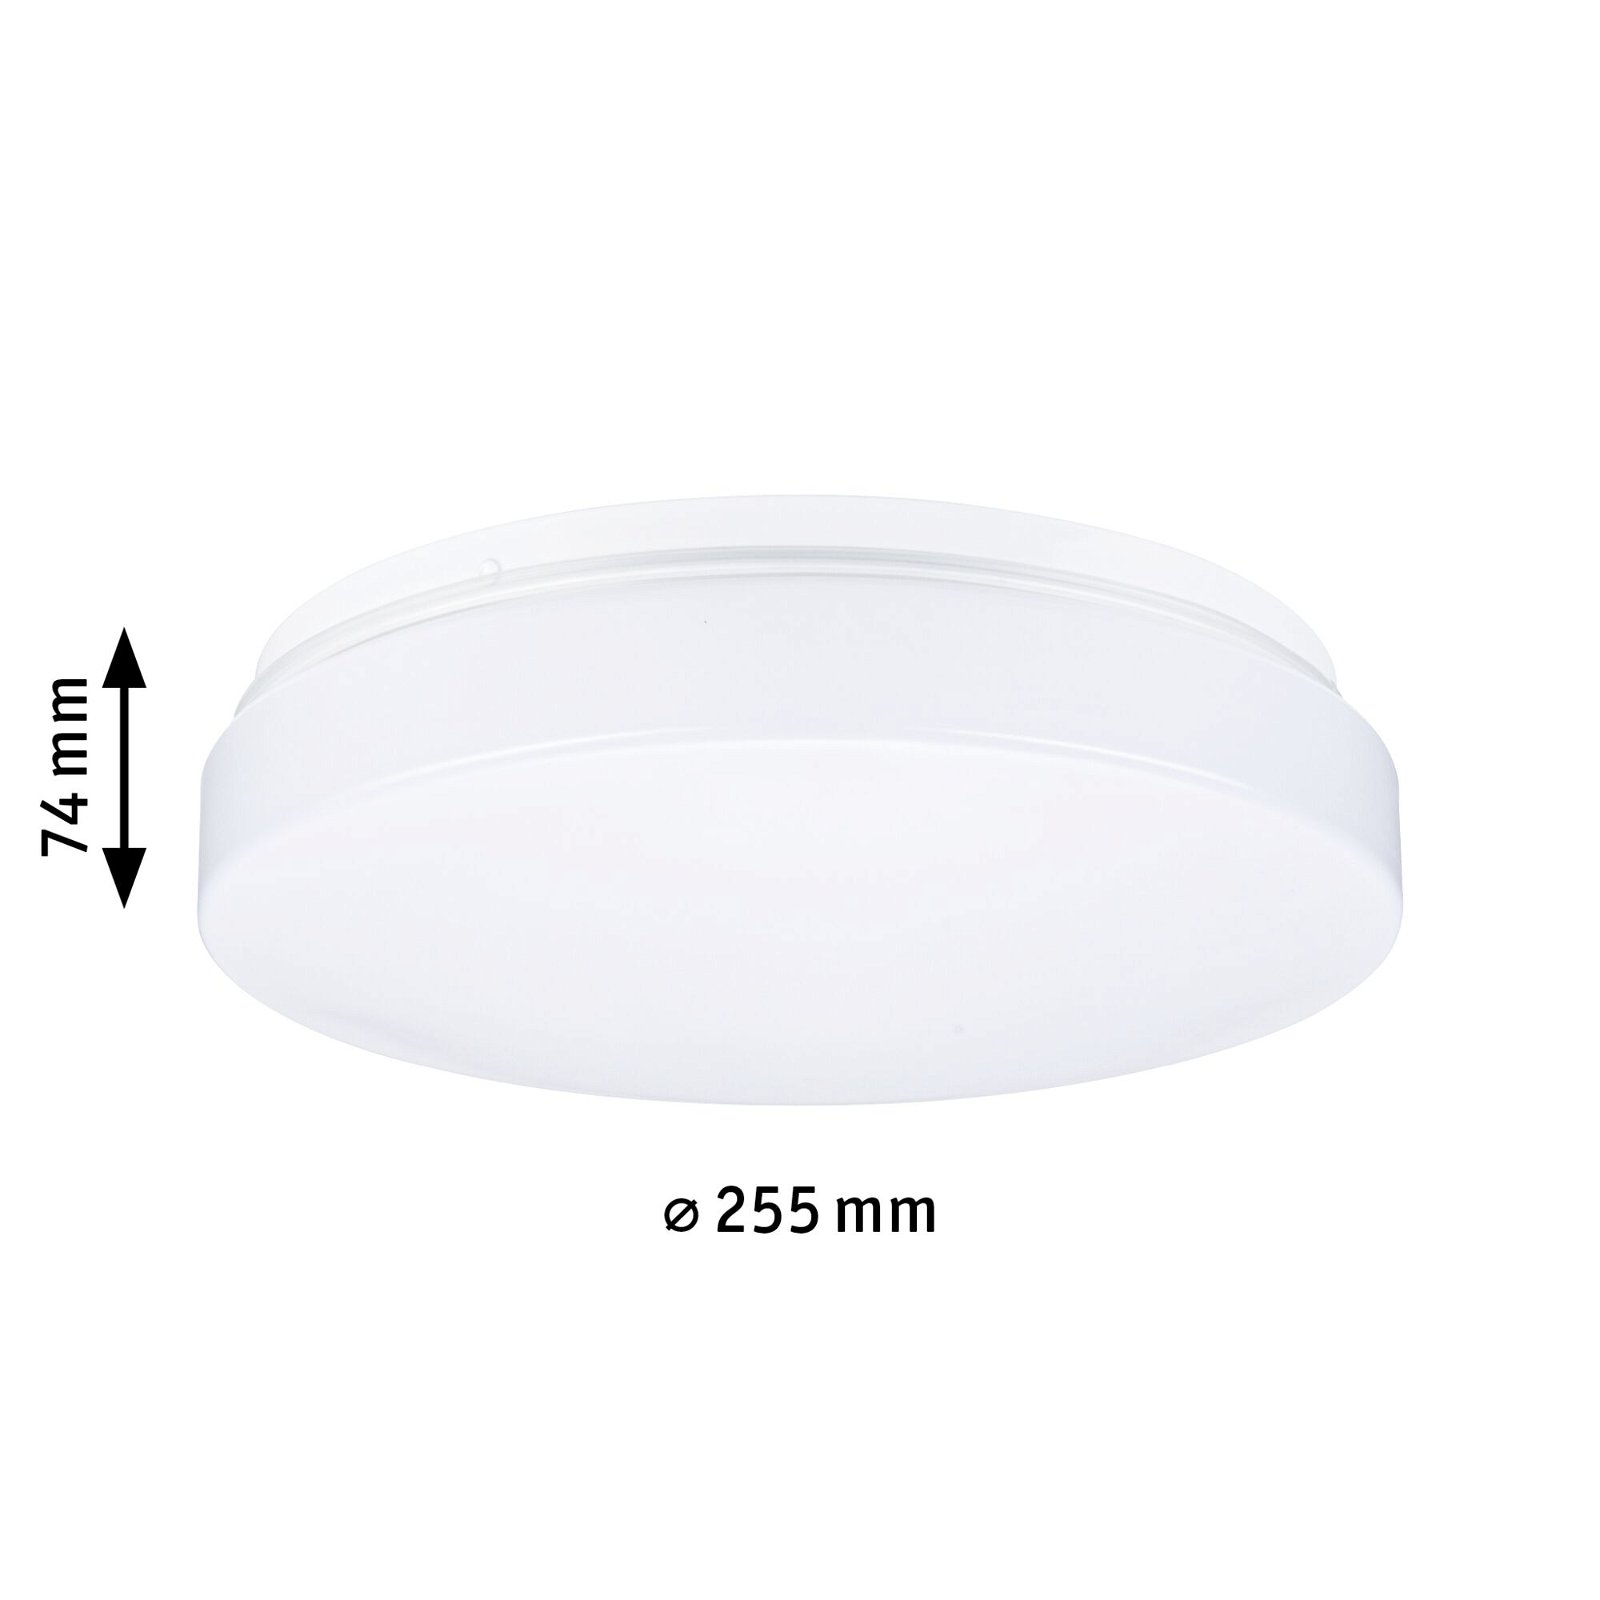 Ceiling luminaire Axin IP44 E27 230V max. 18W dimmable White